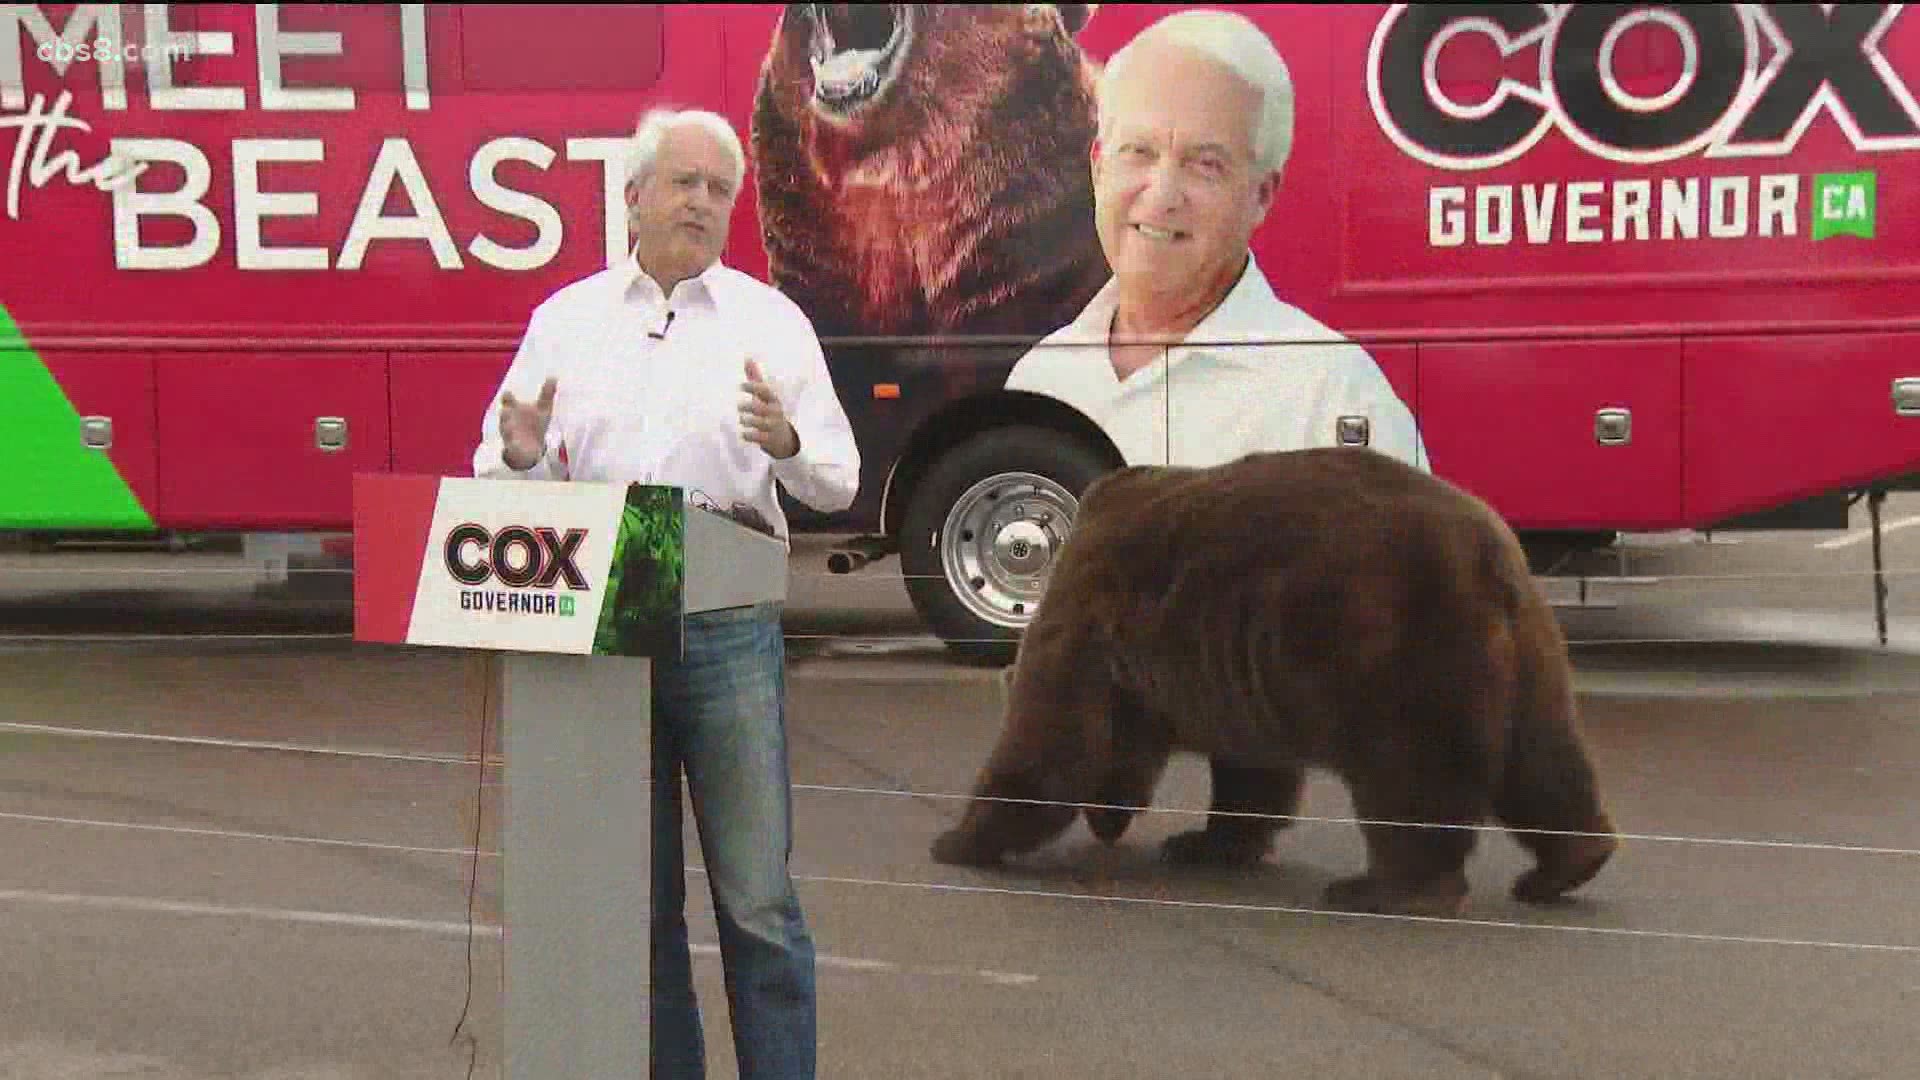 Some criticized the decision to bring a bear along, saying it’s an unhealthy environment for the 1,000-pound large animal.